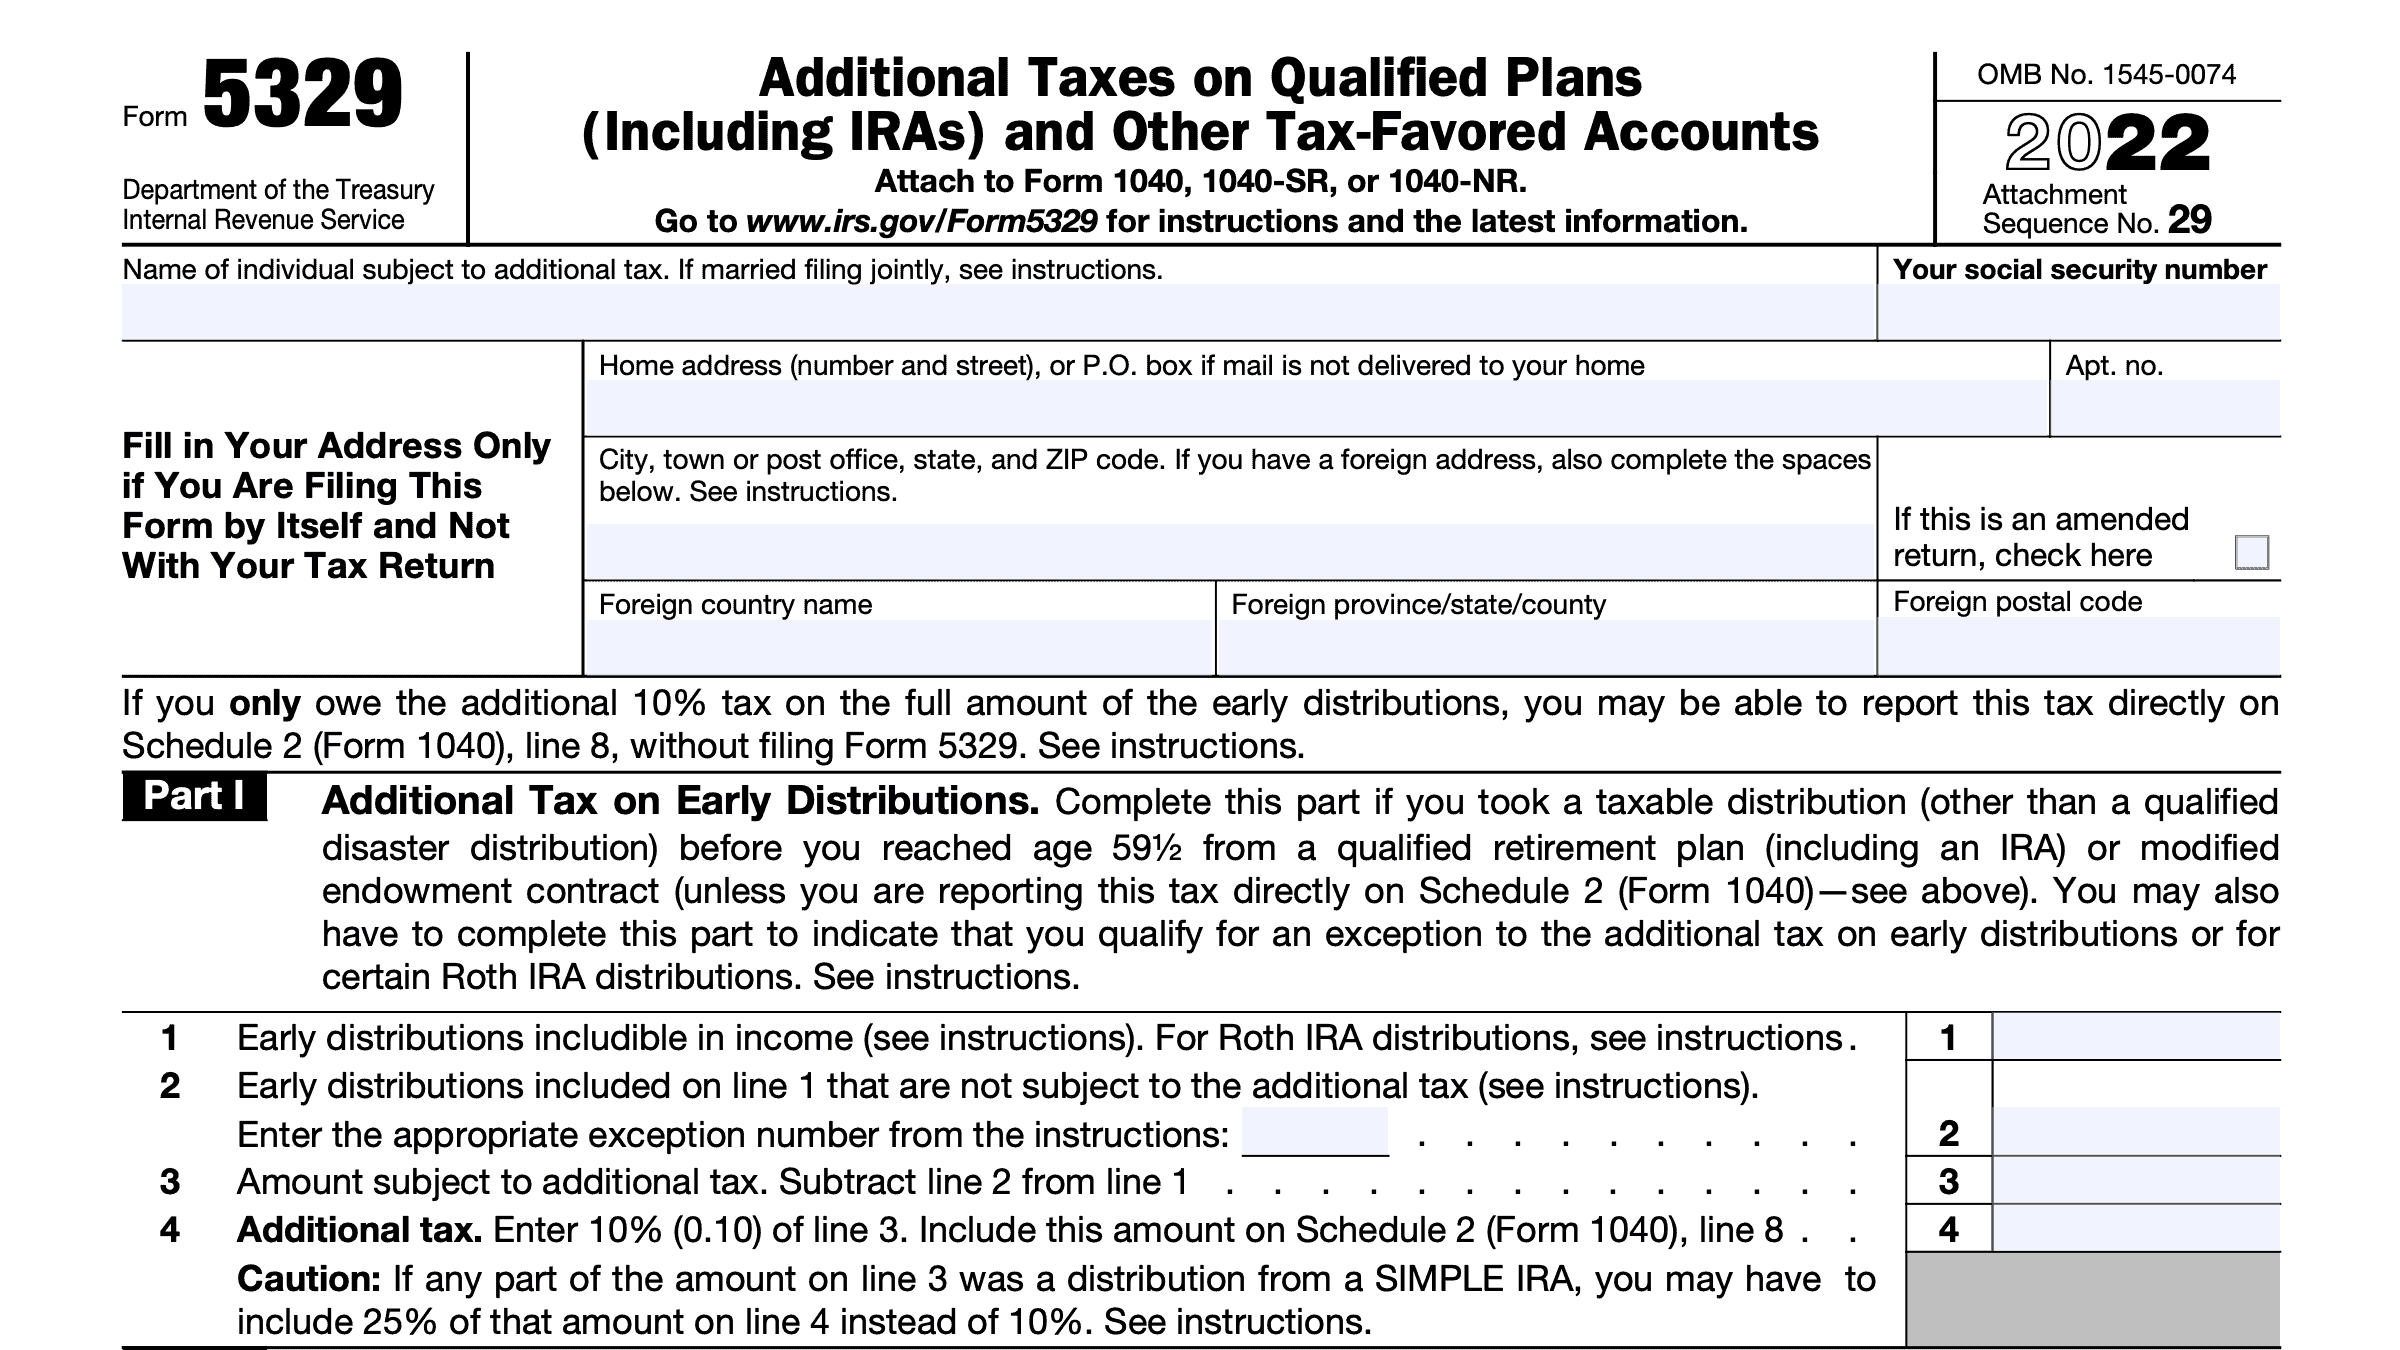 IRS Form 5329 Instructions A Guide to Additional Taxes